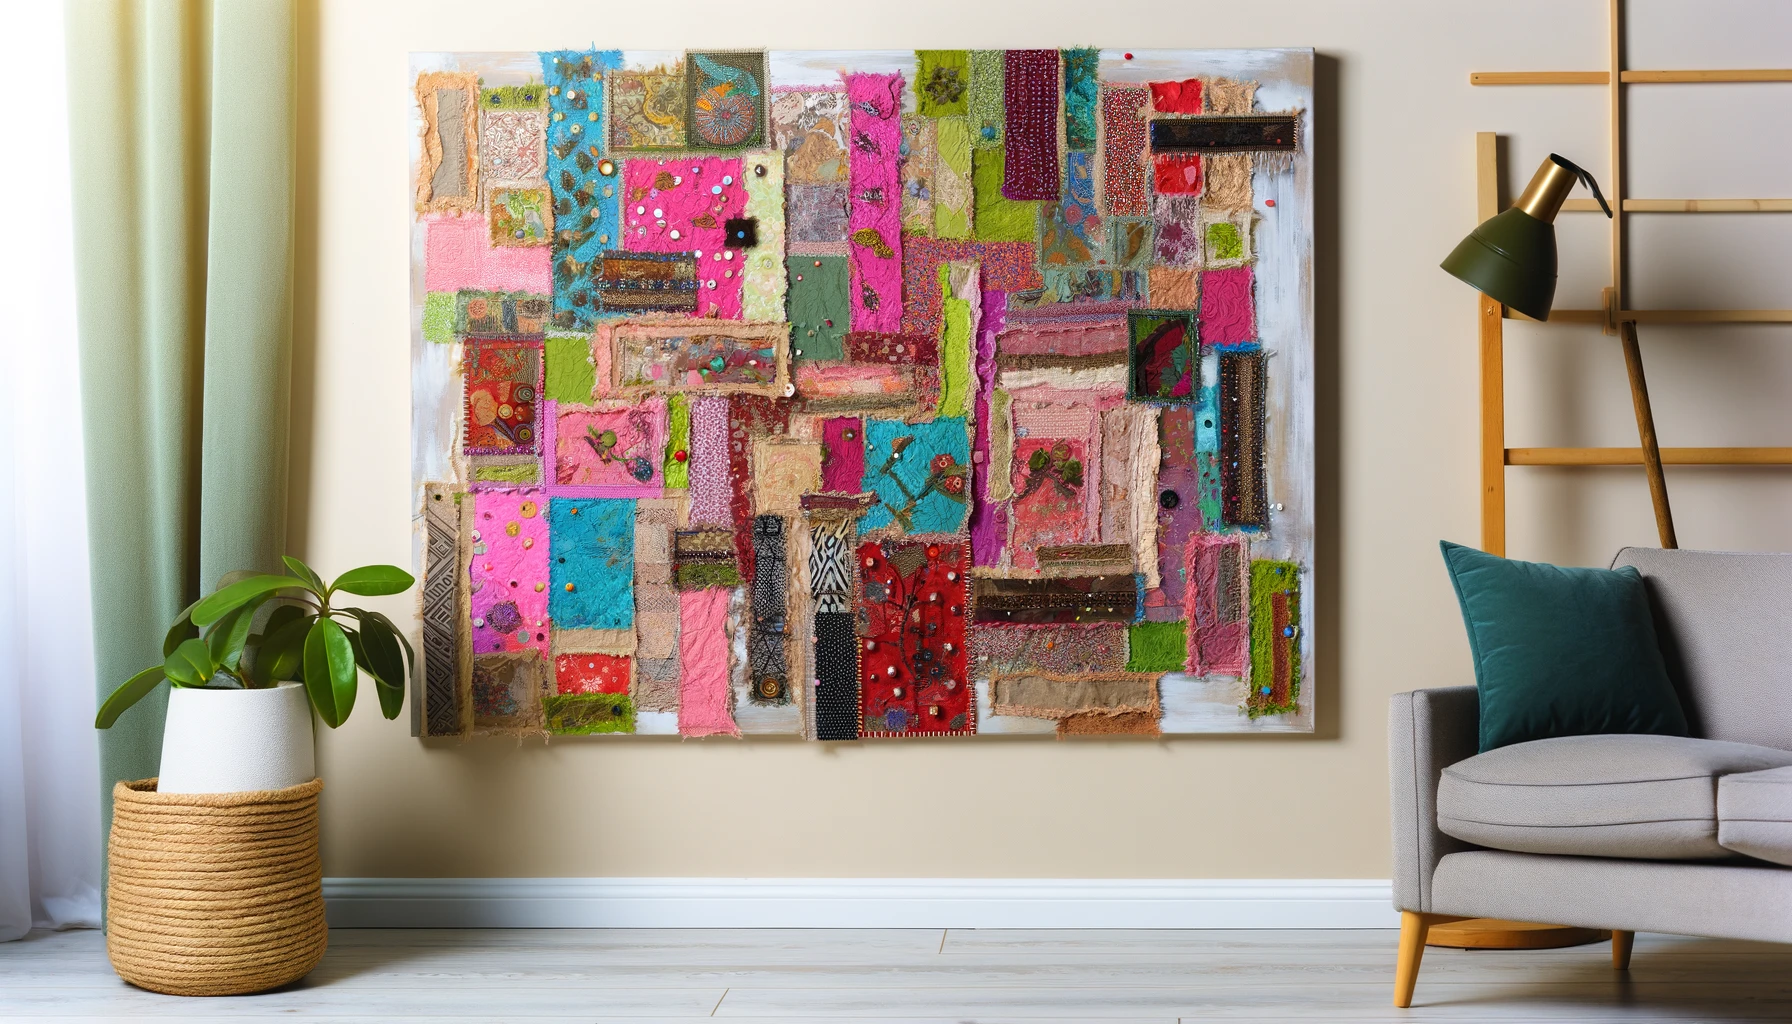 Here's an image showcasing a vibrant and colorful boho wall art piece made from embellished fabric scraps. The artwork features a dynamic collage of various fabrics, each with different textures and patterns, including floral, geometric, and abstract designs. The piece is further enhanced with beads, buttons, and embroidery, adding depth and intricacy. This handmade art, displayed on a large canvas, complements the bohemian decor of a stylish room beautifully.